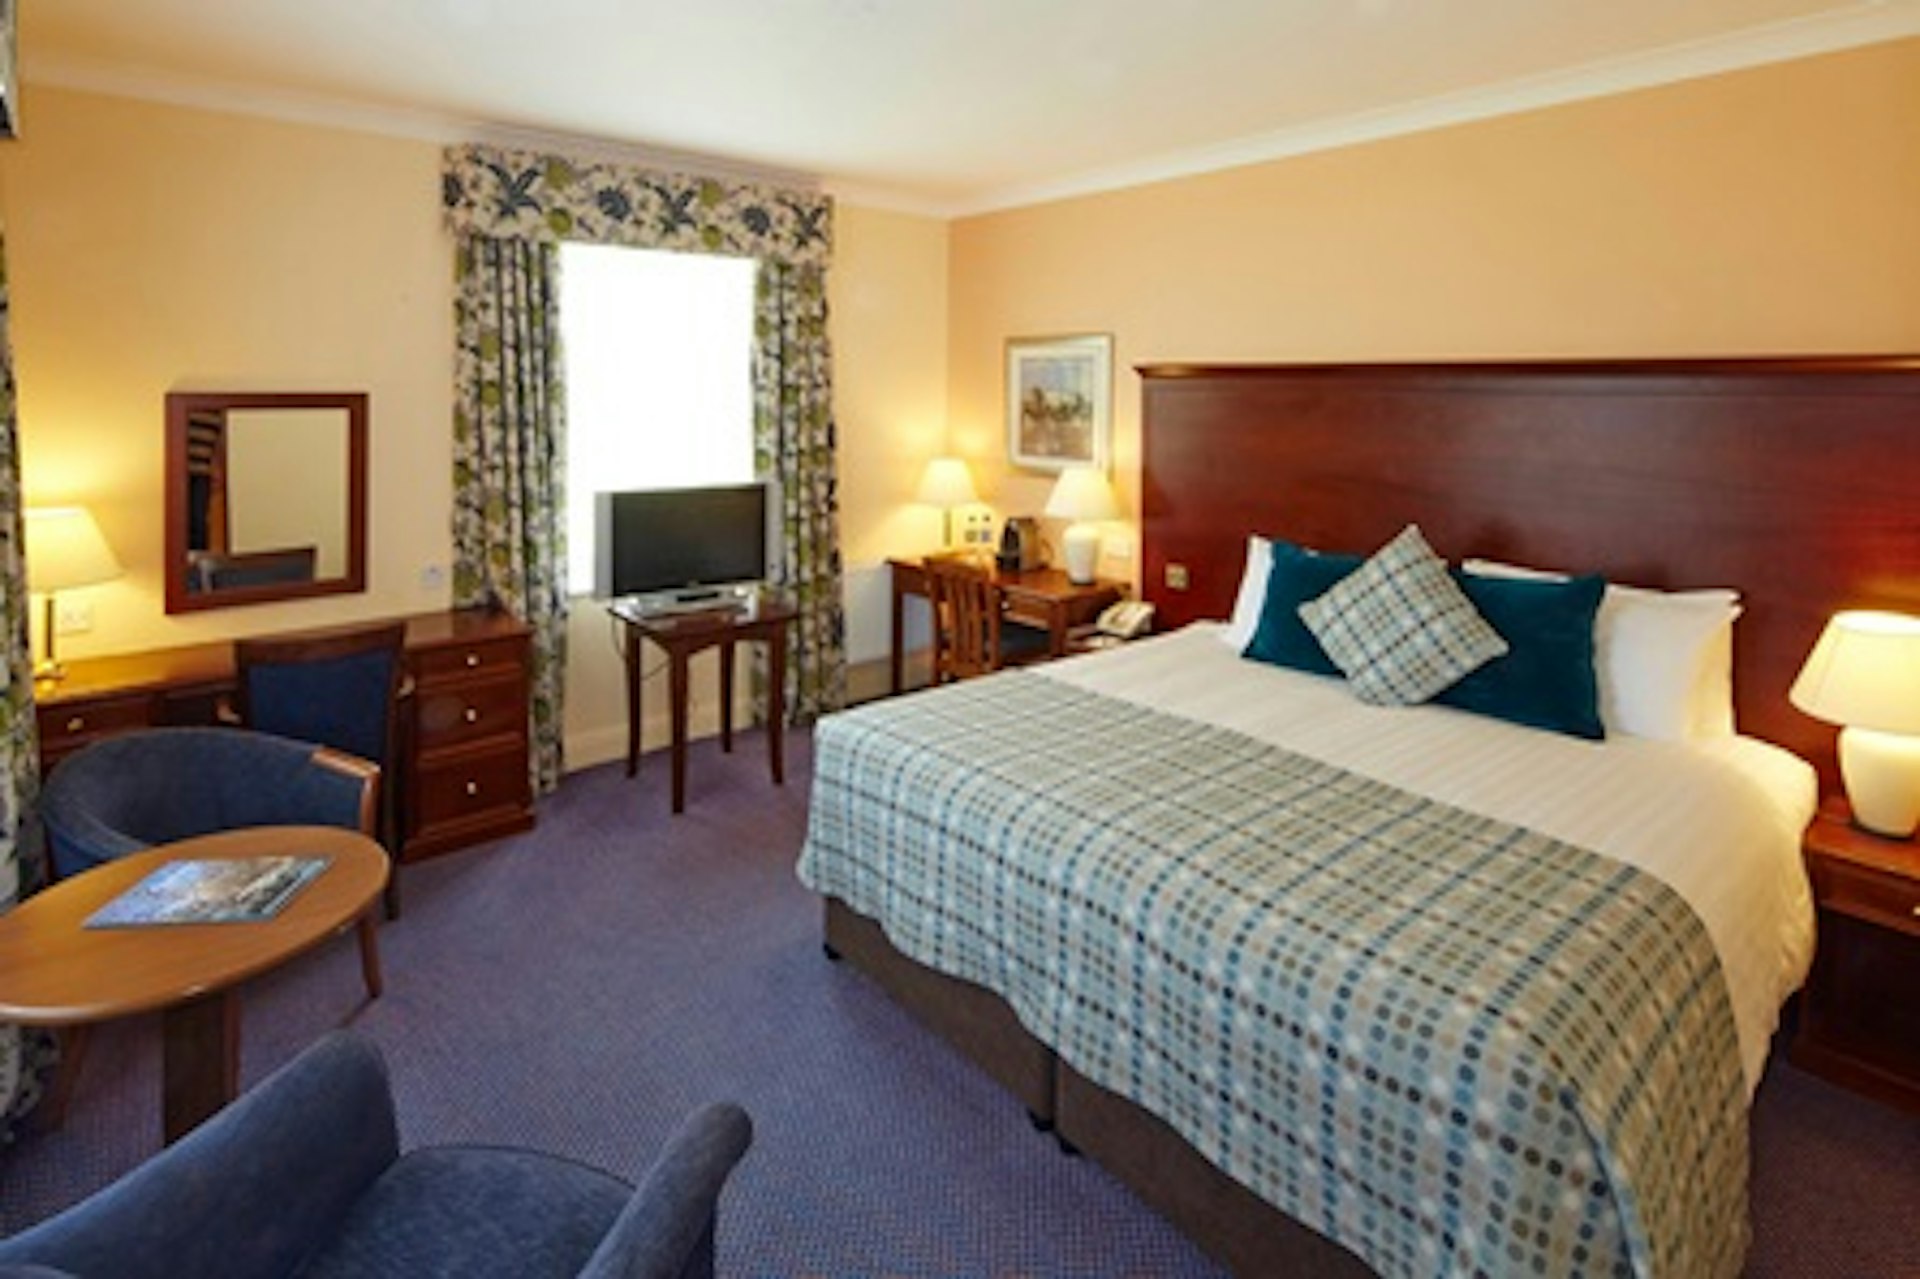 One Night Break with Dinner for Two at the Mercure Newbury Elcot Park Hotel 4